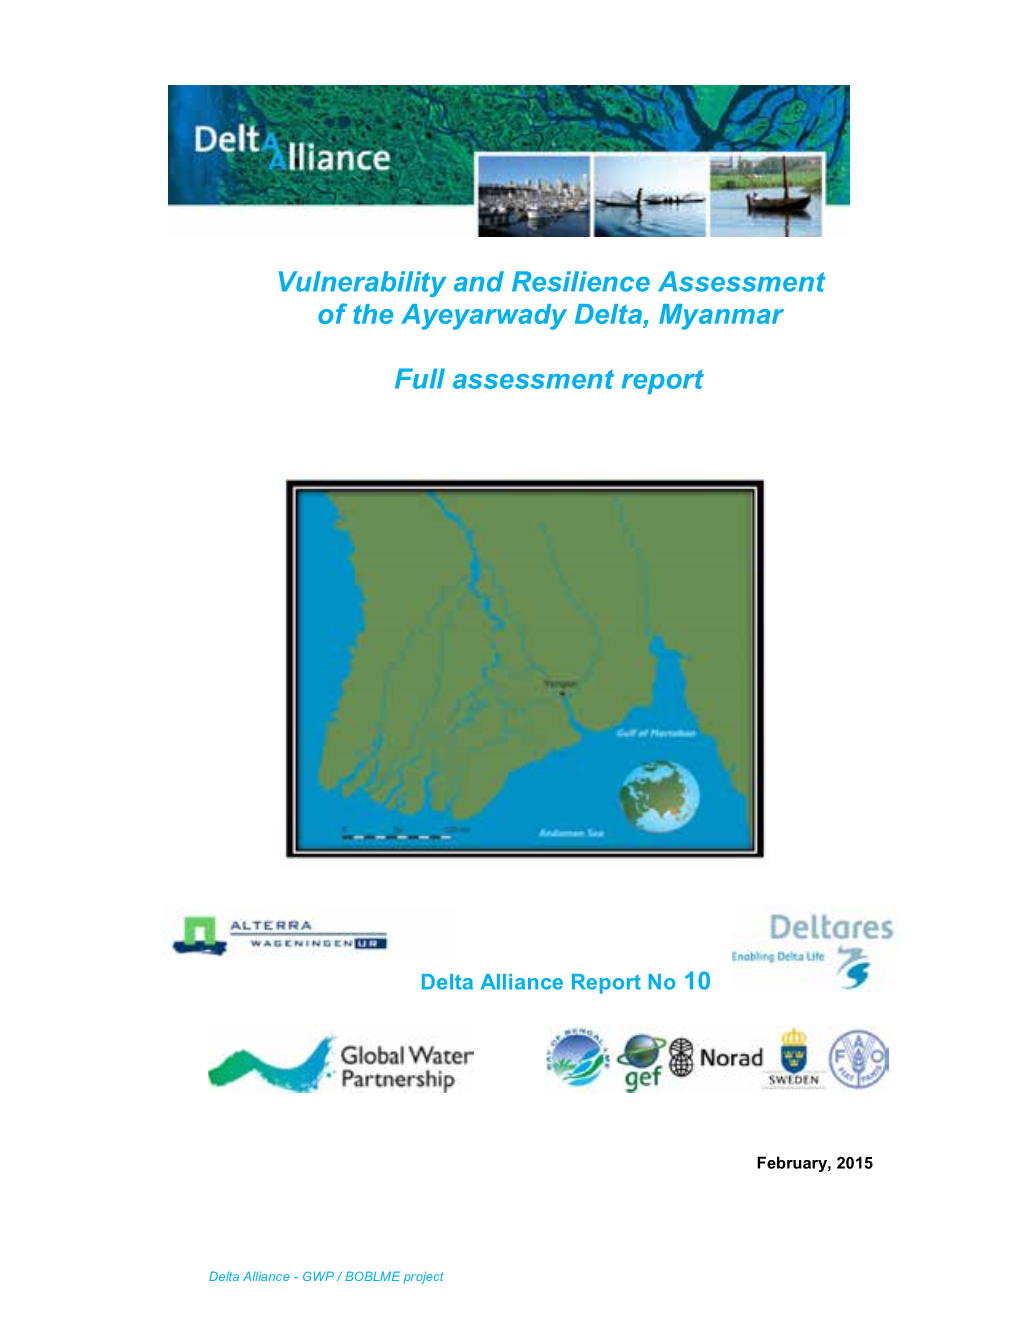 Vulnerability and Resilience Assessment of the Ayeyarwady Delta in Myanmar